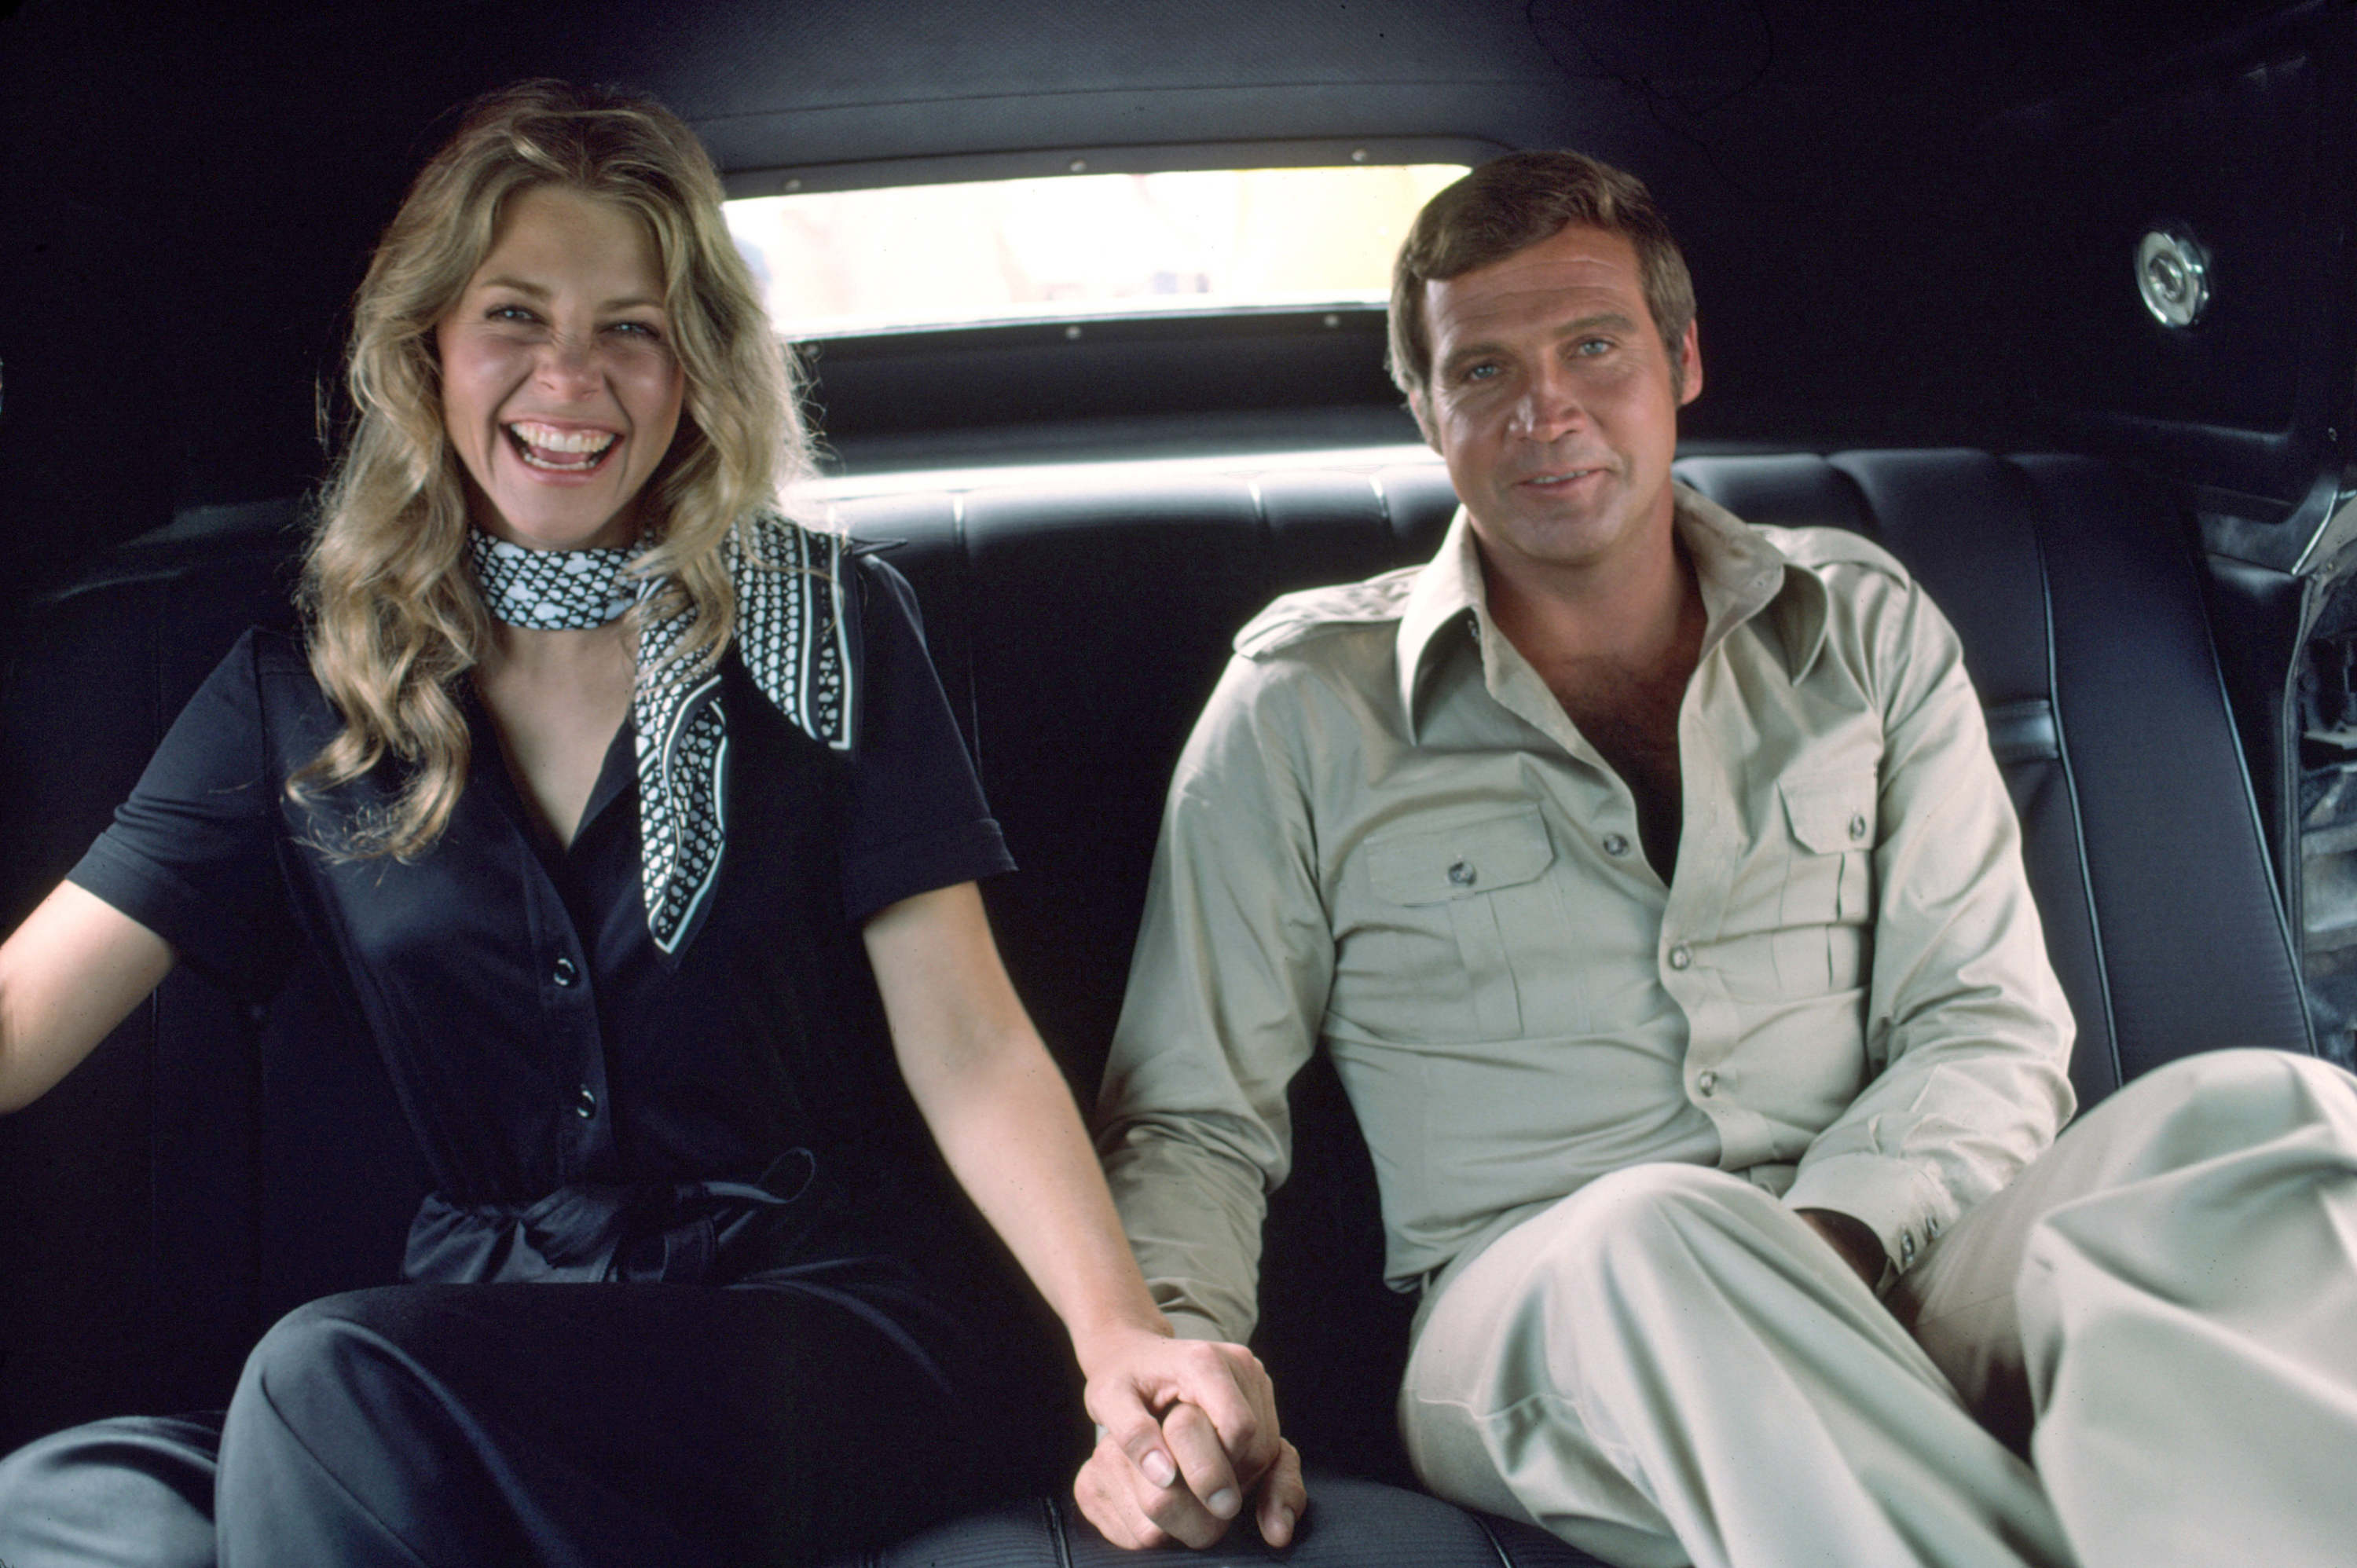 Lindsay Wagner (Jaime) and Lee Majors (Steve) “The Bionic Woman” on September 21, 1975 | Source: Getty Images